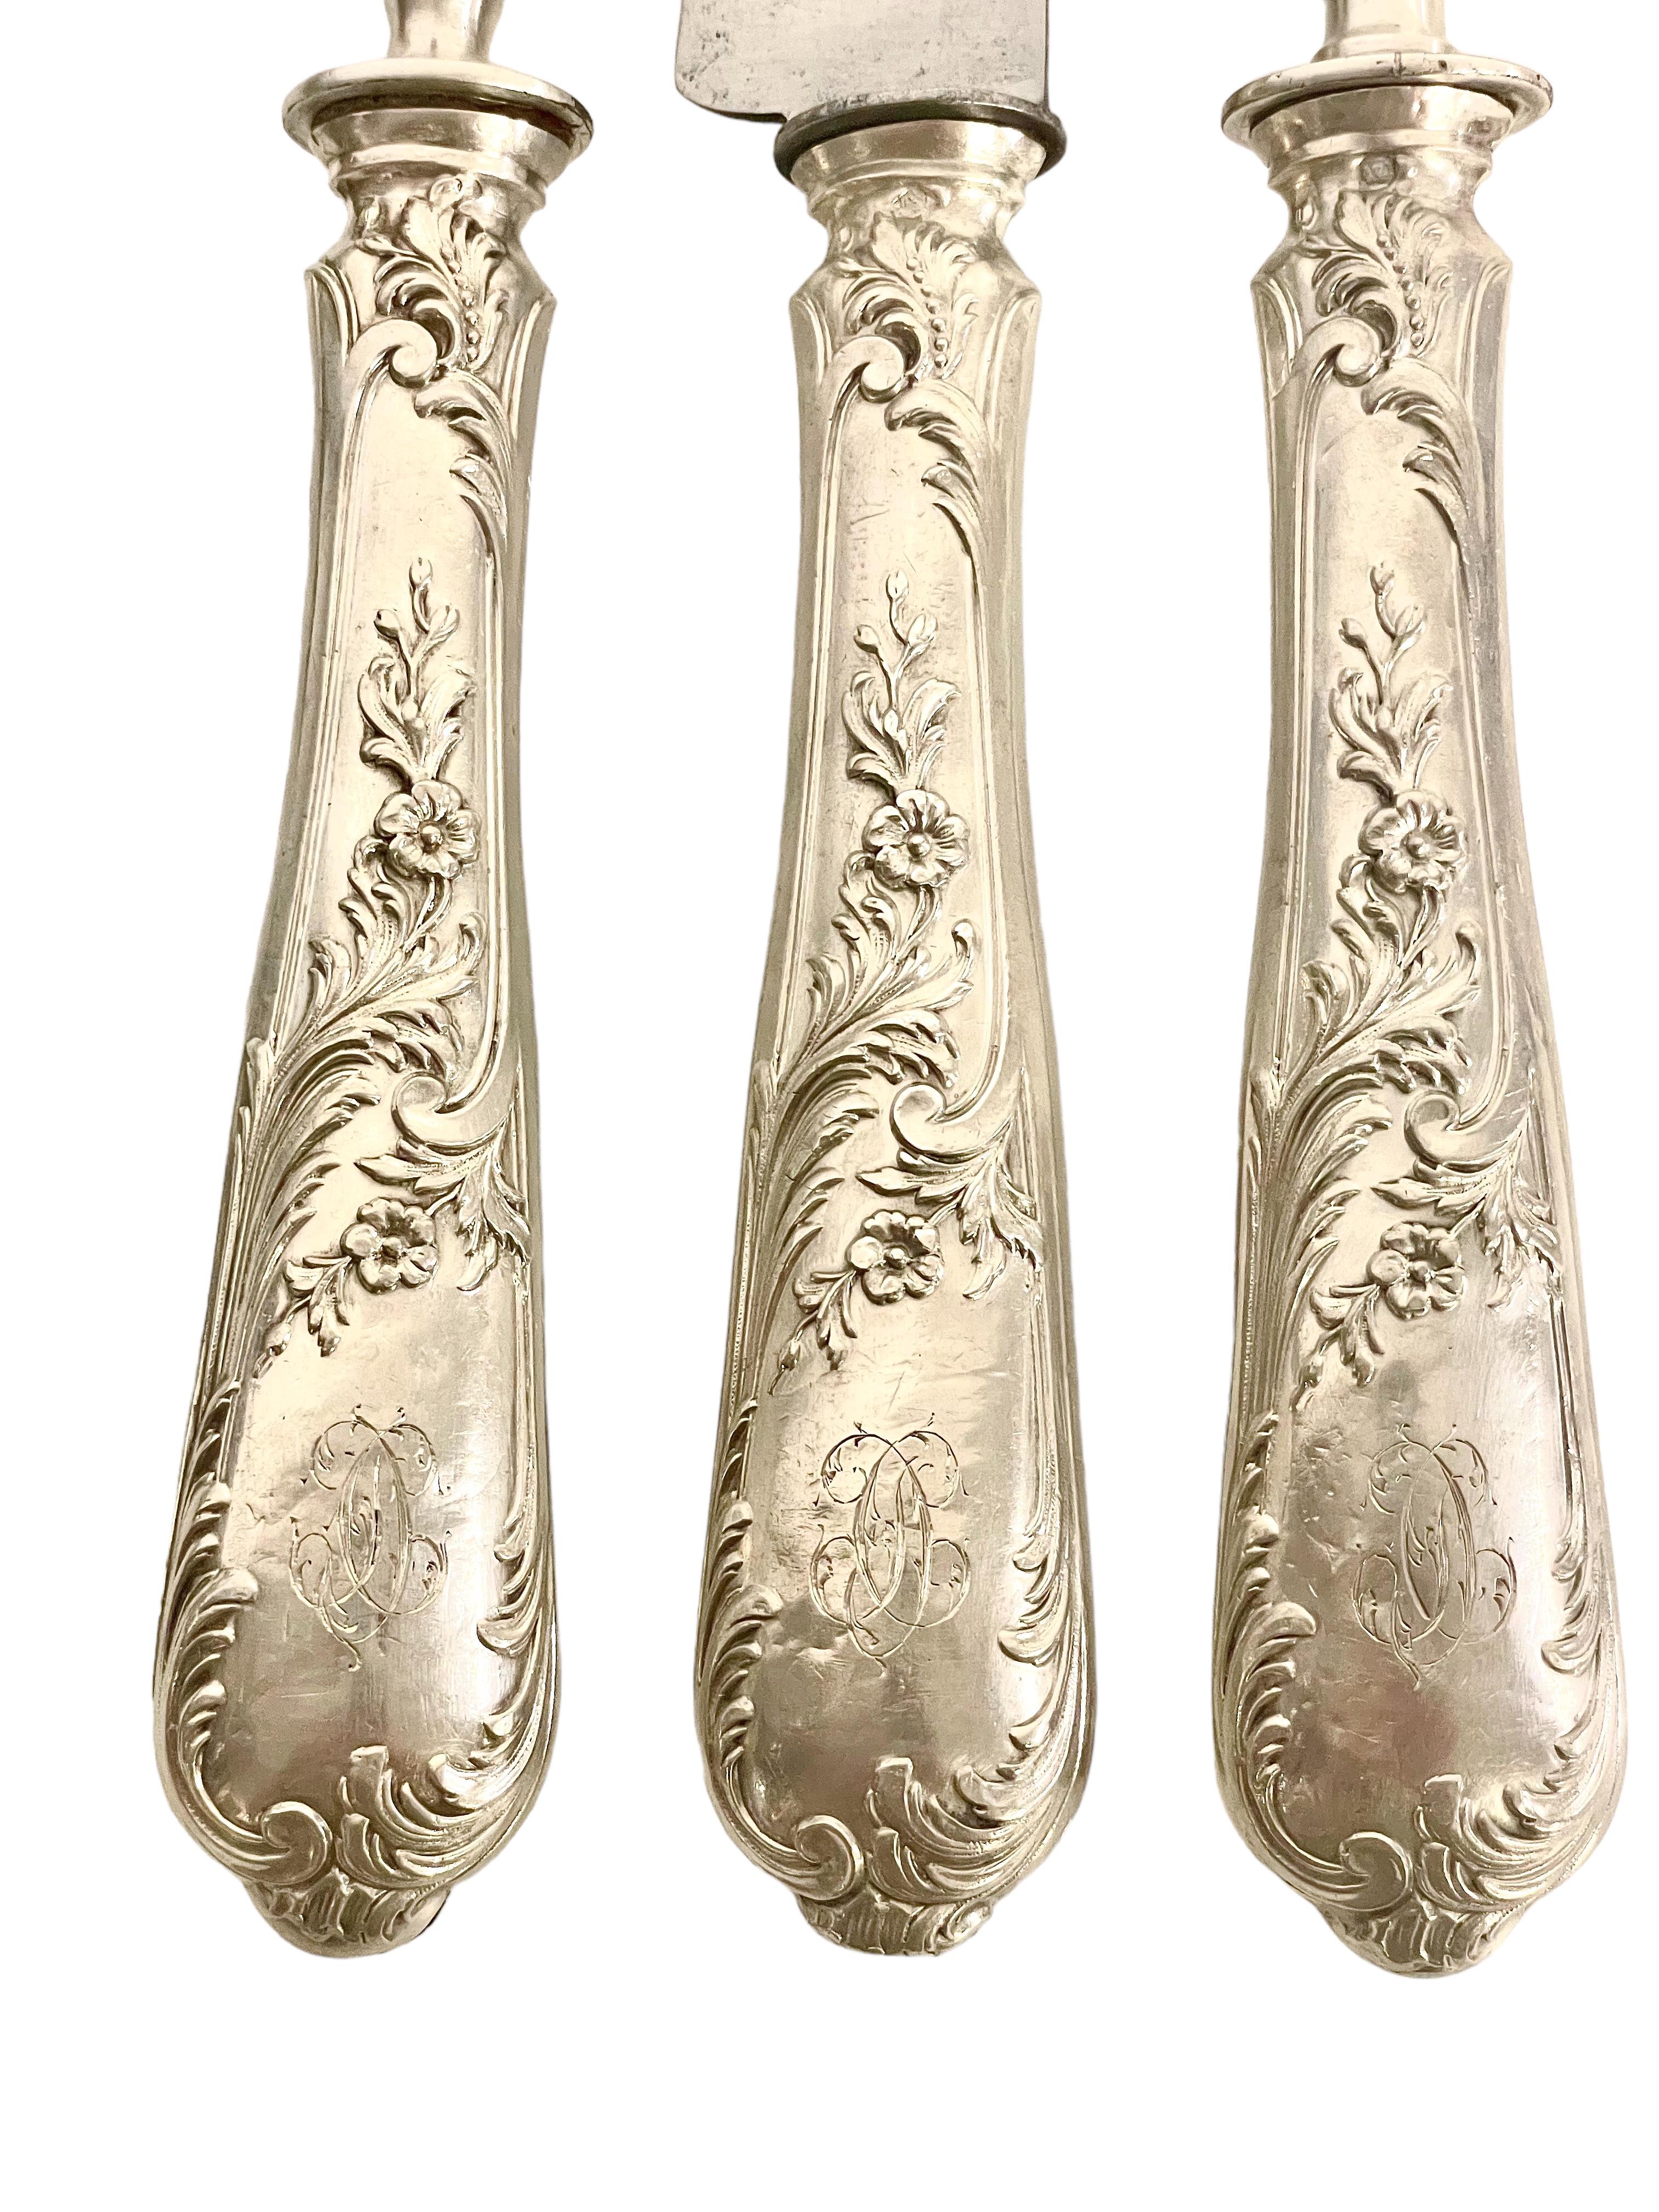 A superbly presented Louis XIV style three piece 'Gigot' lamb carving set, comprising a carving knife, carving fork and leg-bone holder, or 'manche à gigot'. The leg-bone holder is an unusual item, and is used to assist in the carving of a joint of